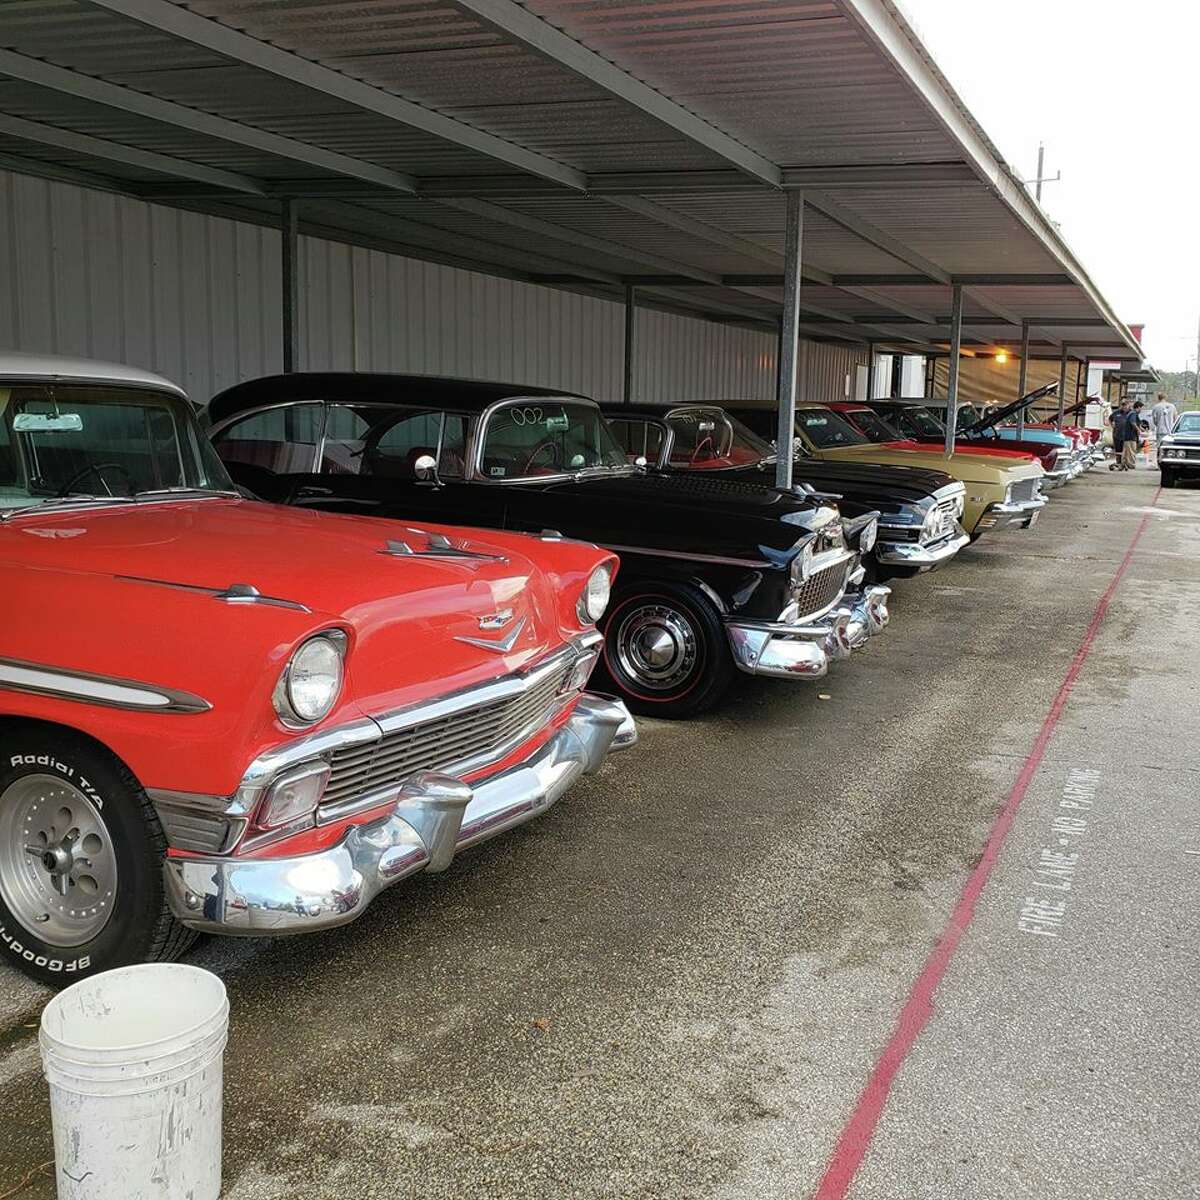 Houston-area man auctioning father's massive classic car collection in